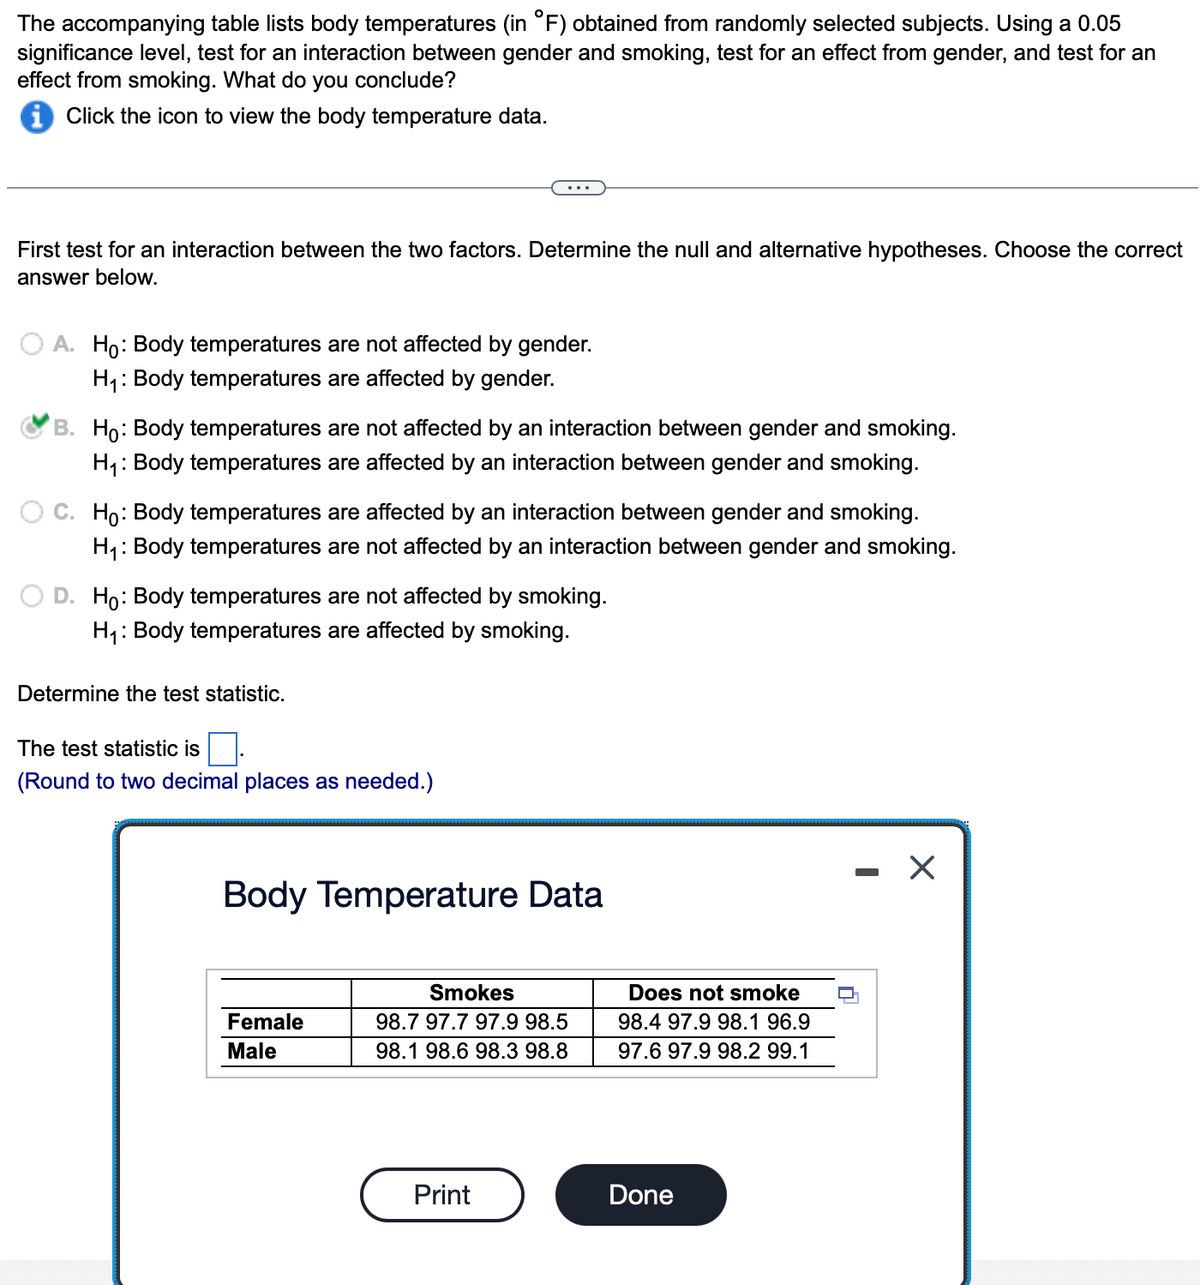 The accompanying table lists body temperatures (in °F) obtained from randomly selected subjects. Using a 0.05
significance level, test for an interaction between gender and smoking, test for an effect from gender, and test for an
effect from smoking. What do you conclude?
Click the icon to view the body temperature data.
First test for an interaction between the two factors. Determine the null and alternative hypotheses. Choose the correct
answer below.
A. Ho: Body temperatures are not affected by gender.
H₁: Body temperatures are affected by gender.
B. Ho: Body temperatures are not affected by an interaction between gender and smoking.
H₁: Body temperatures are affected by an interaction between gender and smoking.
C. Ho: Body temperatures are affected by an interaction between gender and smoking.
H₁: Body temperatures are not affected by an interaction between gender and smoking.
D. Ho: Body temperatures are not affected by smoking.
H₁: Body temperatures are affected by smoking.
Determine the test statistic.
The test statistic is
(Round to two decimal places as needed.)
Body Temperature Data
Female
Male
Smokes
98.7 97.7 97.9 98.5
98.1 98.6 98.3 98.8
Print
Does not smoke
98.4 97.9 98.1 96.9
97.6 97.9 98.2 99.1
Done
I
X